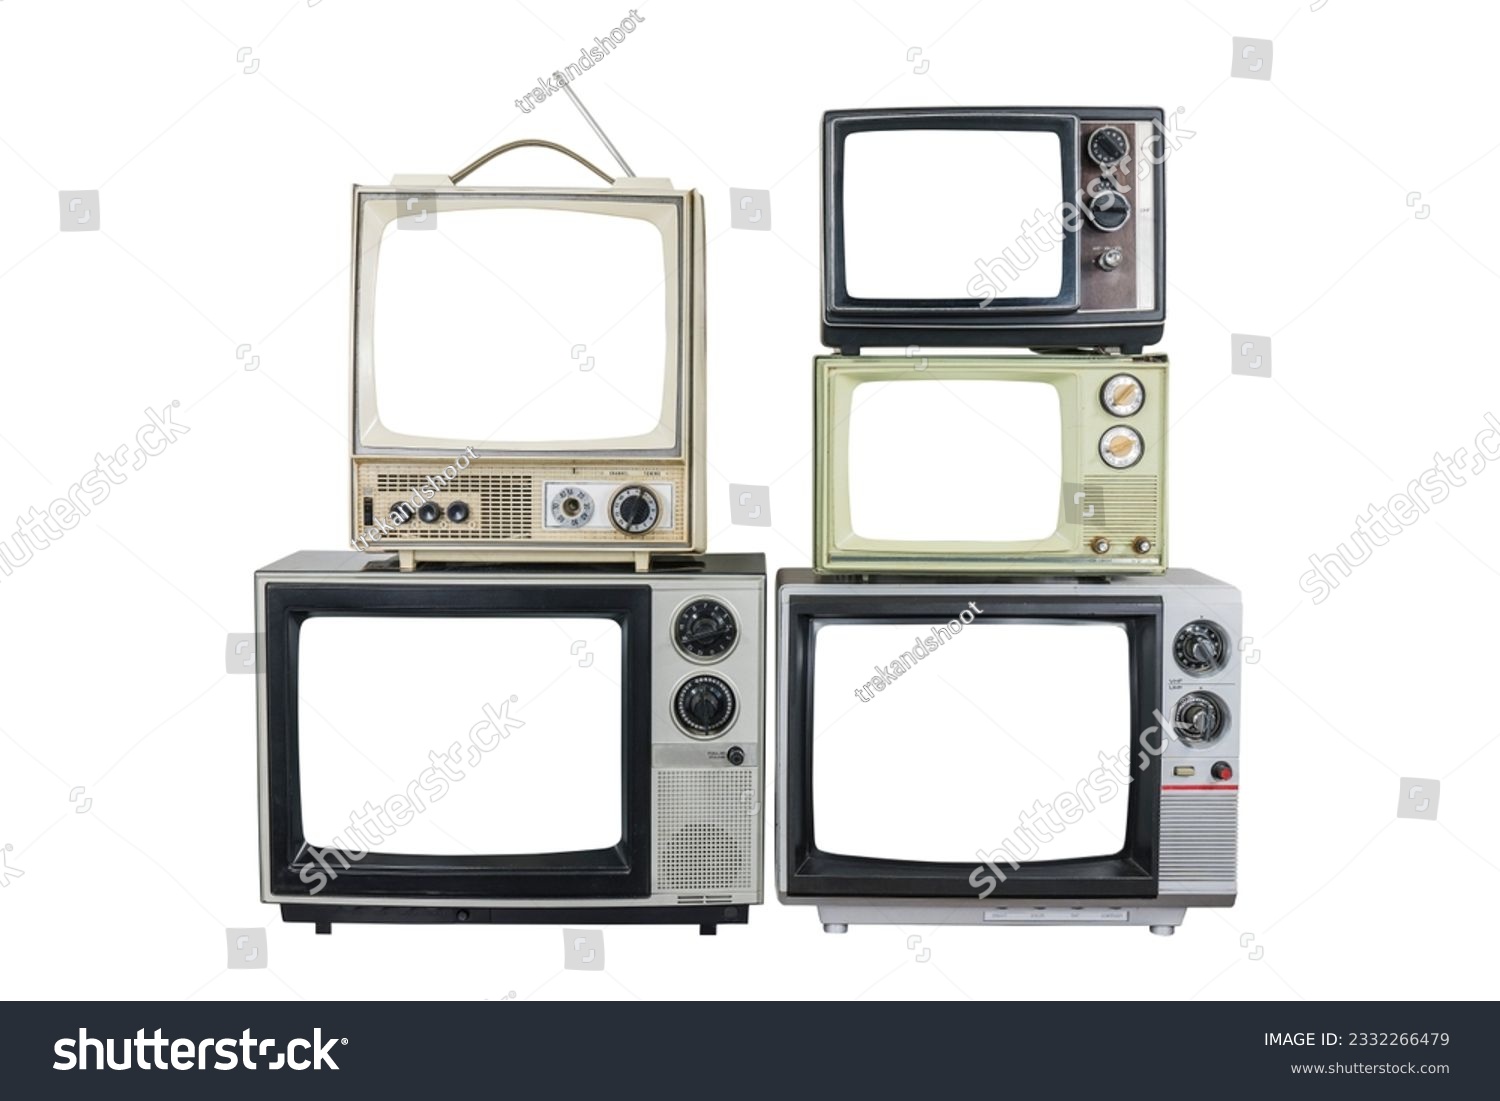 Five vintage televisions with cut out screens isolated. #2332266479